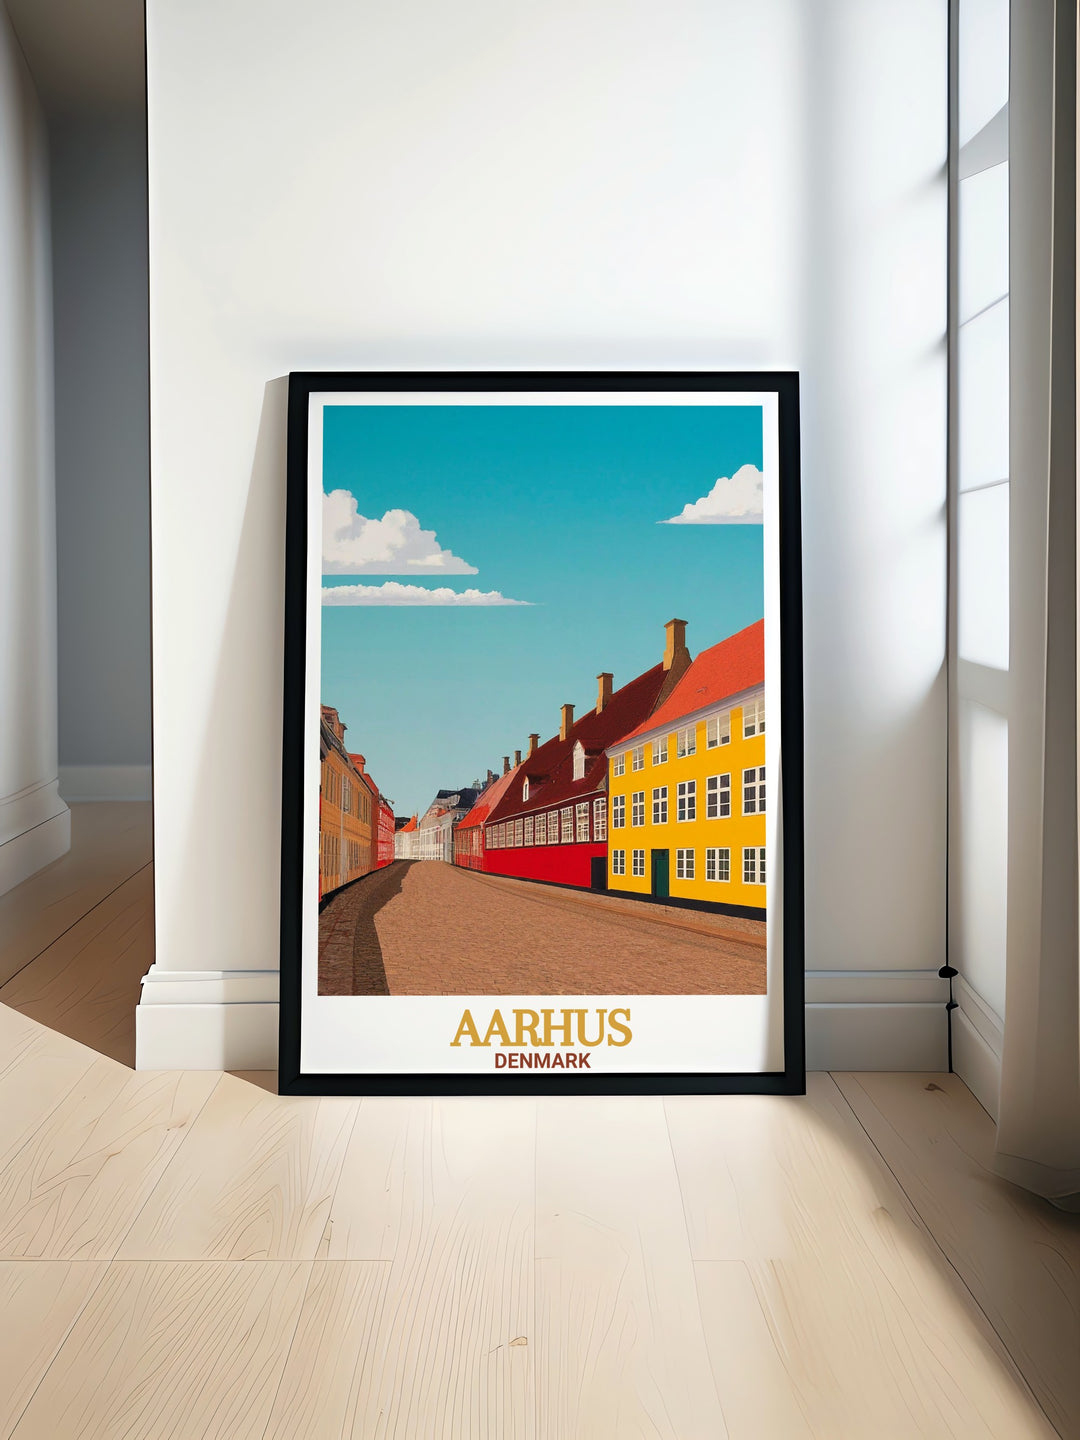 Den Gamle By travel poster showcasing the historic charm of Aarhus Denmark. Perfect for those who love Aarhus travel and Denmark wall art. This stunning print brings a piece of Danish heritage into your home decor and makes a thoughtful Aarhus gift.